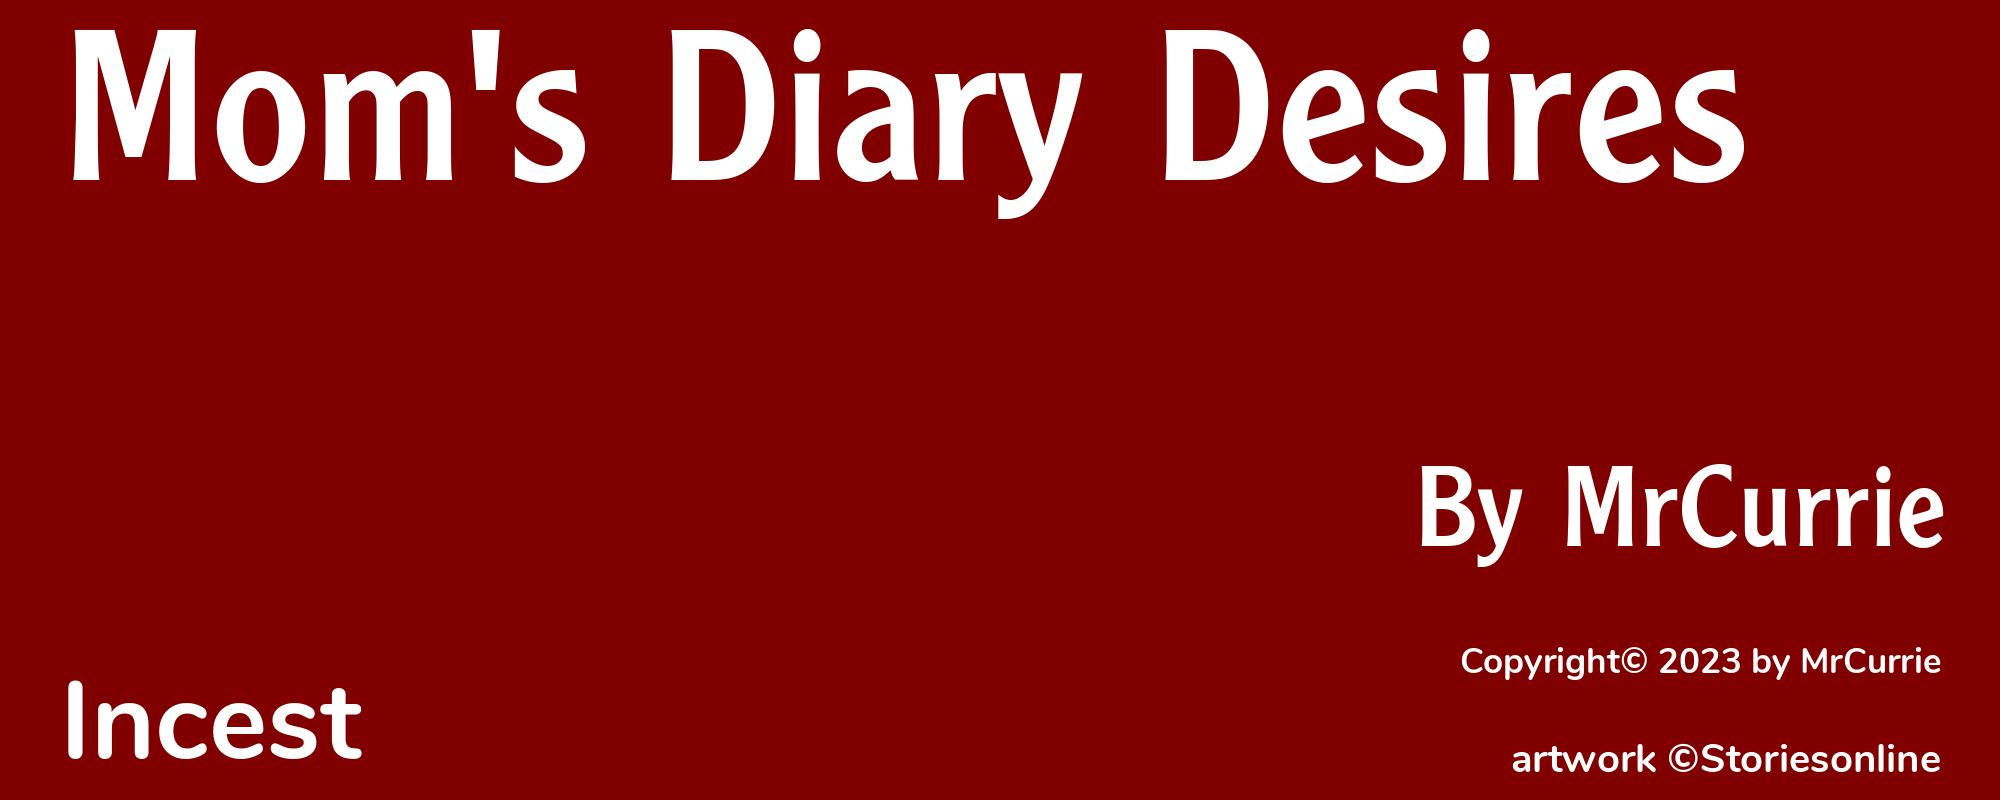 Mom's Diary Desires - Cover